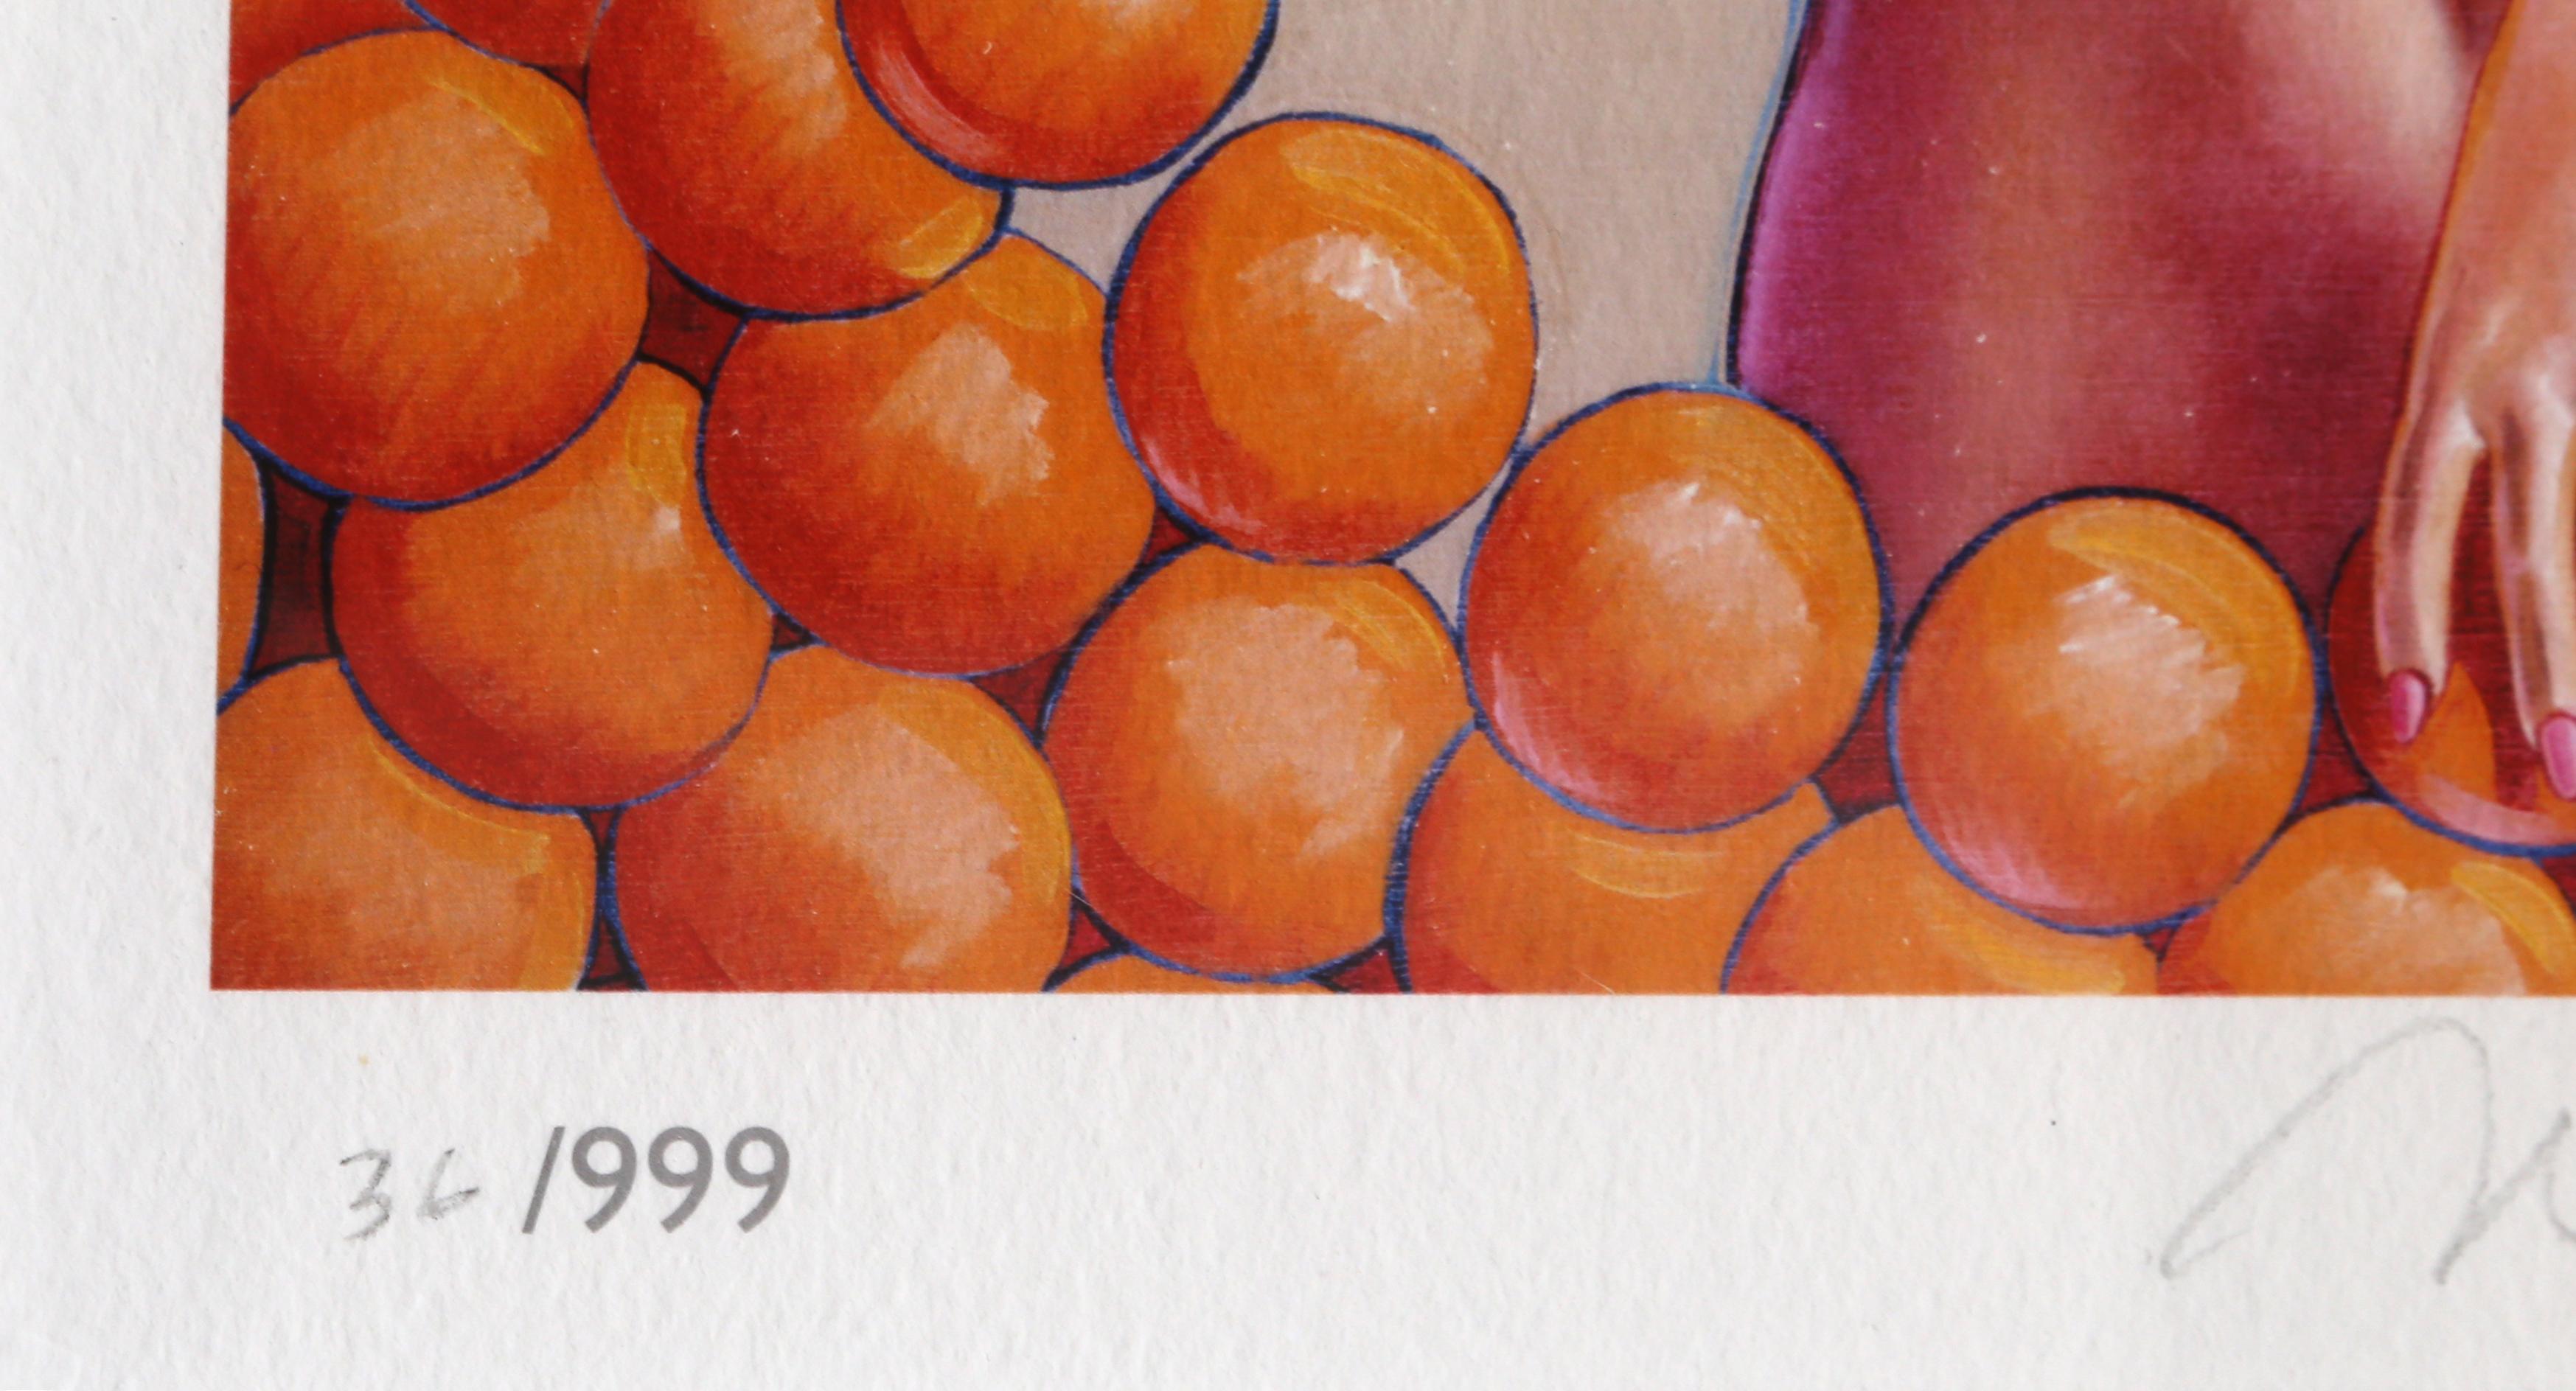 Artist: Mel Ramos, American (1935 - 2018)
Title: Navel Orange
Year: 2013
Medium: Lithograph, signed and numbered in pencil 
Edition: 36/999
Image Size: 8.5 x 7 inches
Frame Size: 19.75 x 15.75 inches